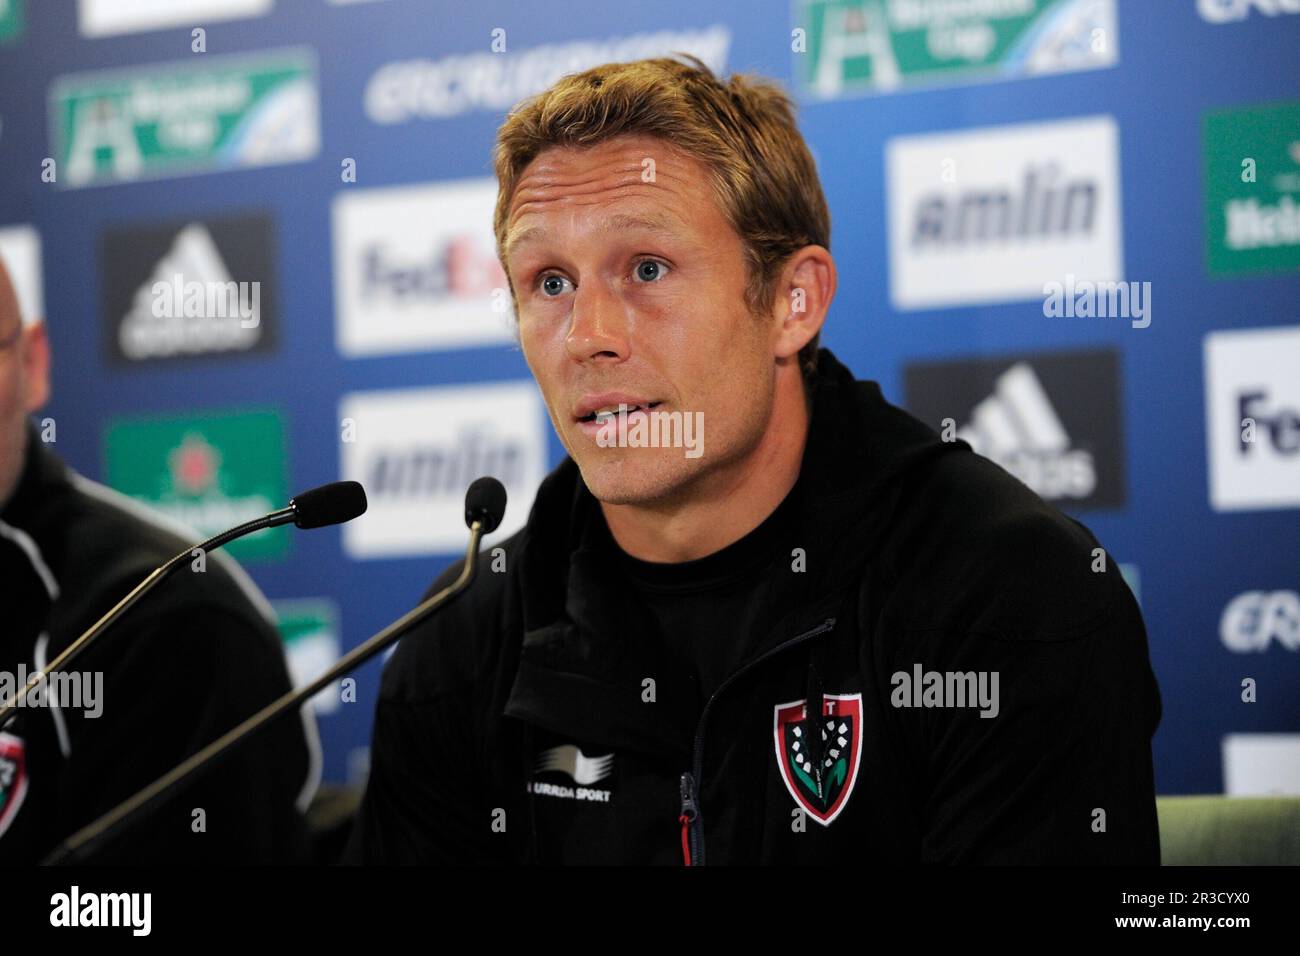 Jonny Wilkinson of RC Toulon during the Captain's Run press conference before the Heineken Cup Final at the Aviva Stadium, Dublin on Friday 17th May 2 Stock Photo